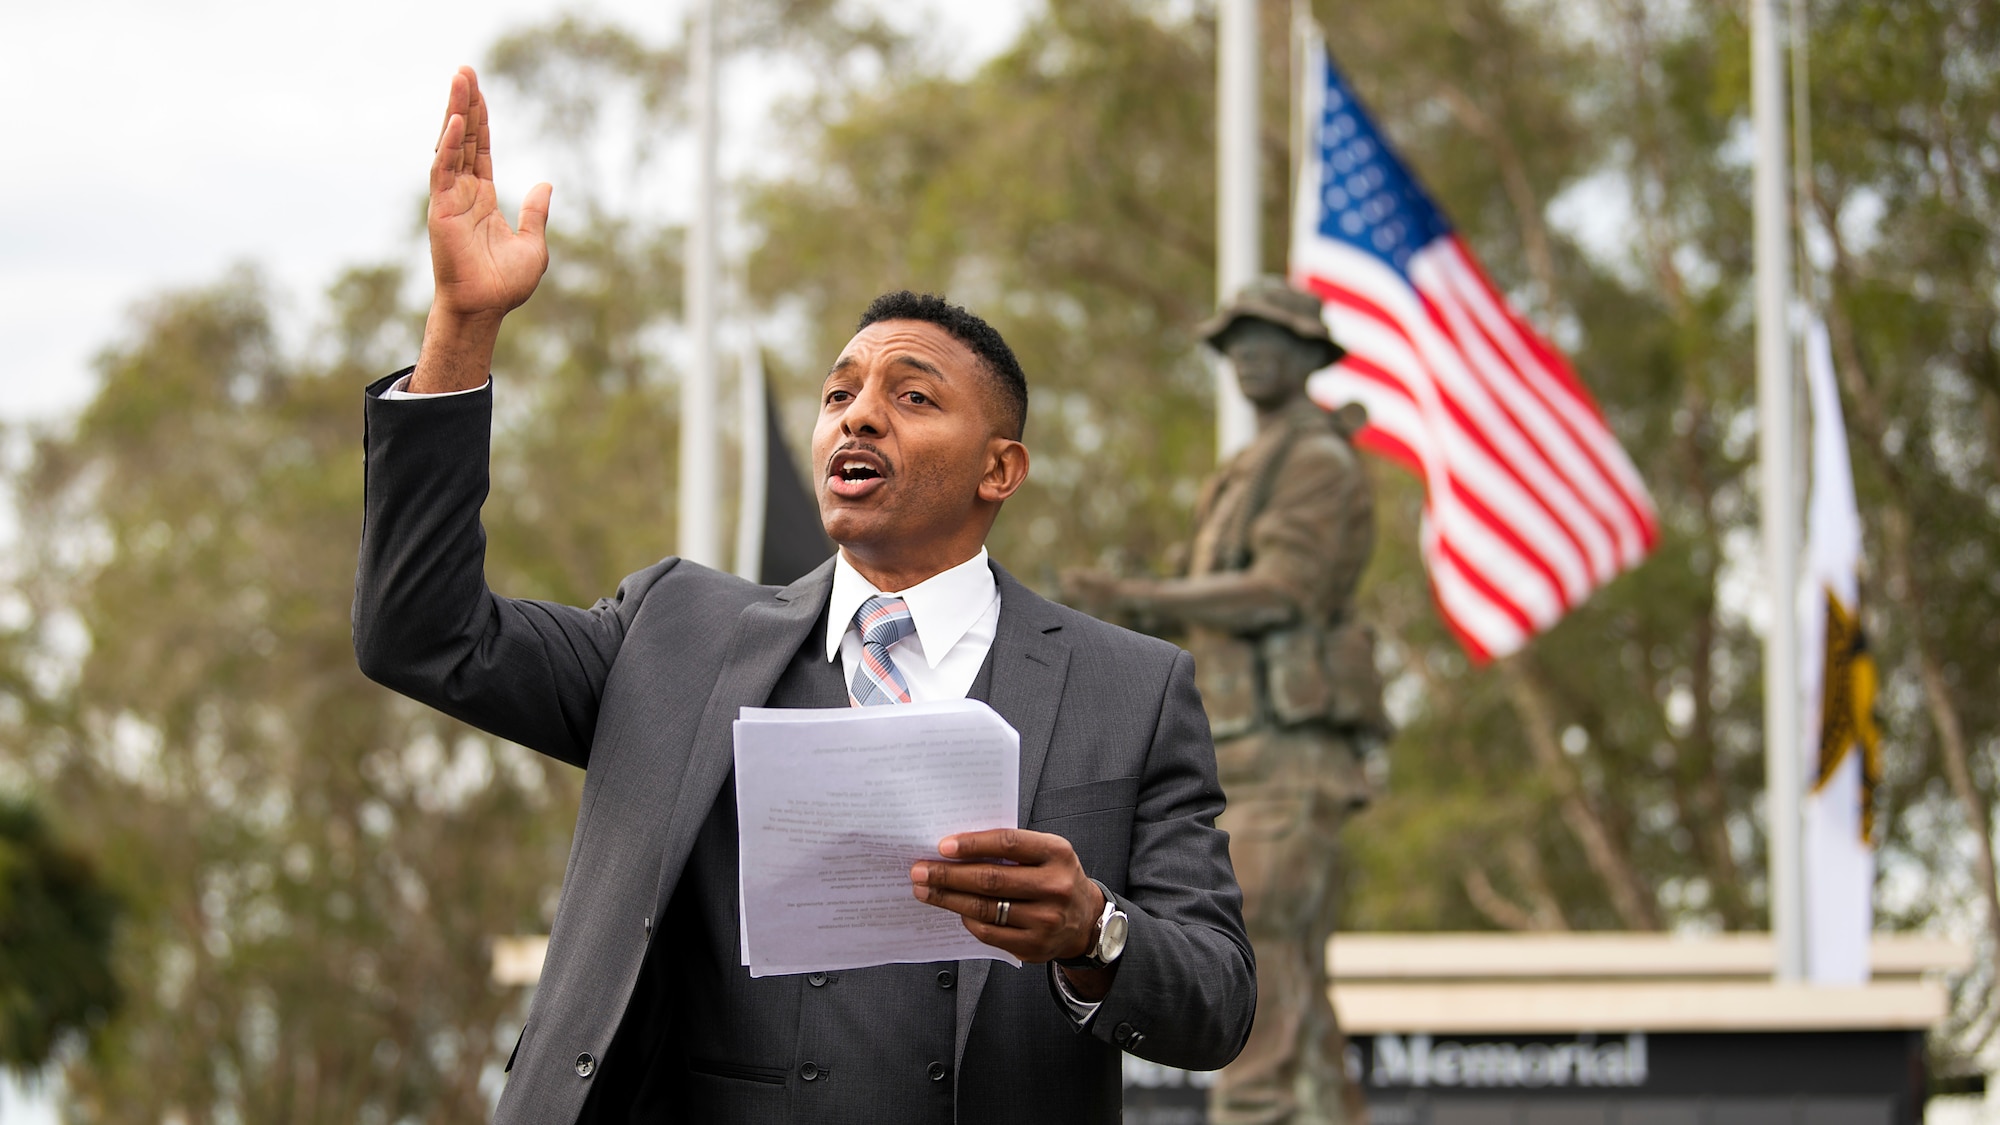 A Team MacDill Member performs “Old Glory” during a 9/11 memorial ceremony held at MacDill Air Force Base, Fla., Sept. 11, 2018. The remembrance ceremony was held at the U.S. Special Operations Command Memorial in honor of those who died during the attacks.